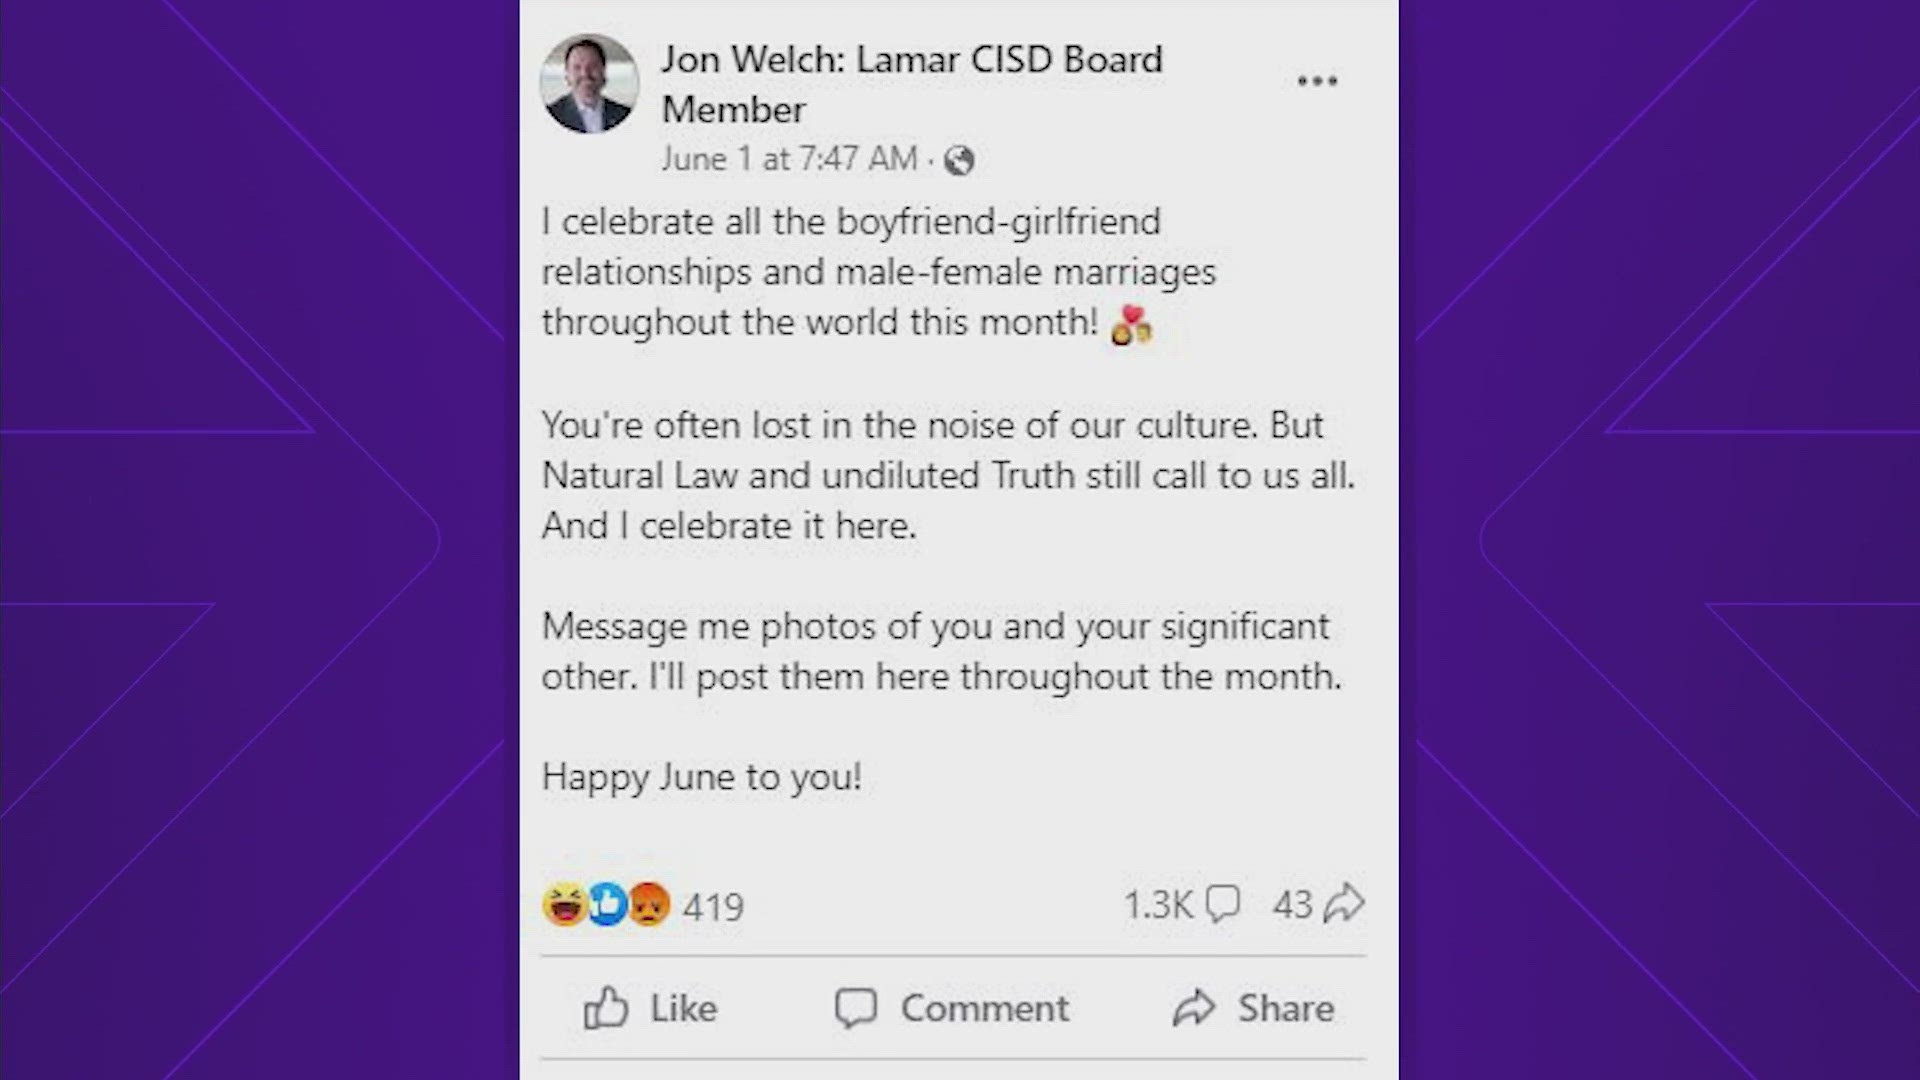 Board member Jon Welch posted that he's celebrating male-female relationships during June. The next day, the district posted a message from the board president.